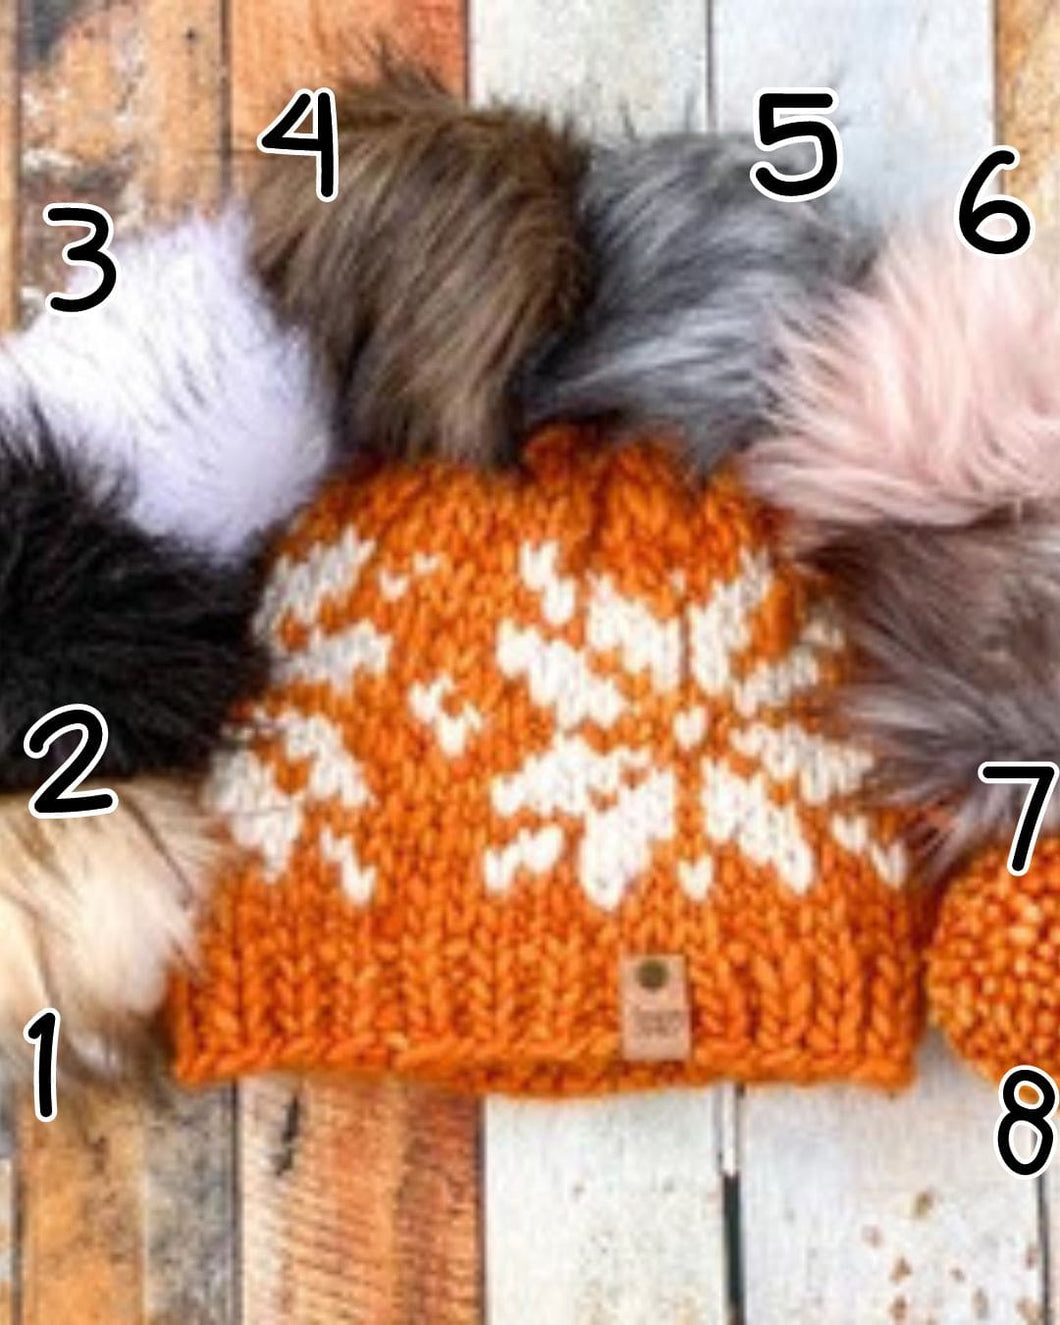 Snowflake Beanie in orange showing all pom options: cream, black, white, brown, gray/black, pink, gray, matching yarn. It is shown in a flat lay against a wooden background.